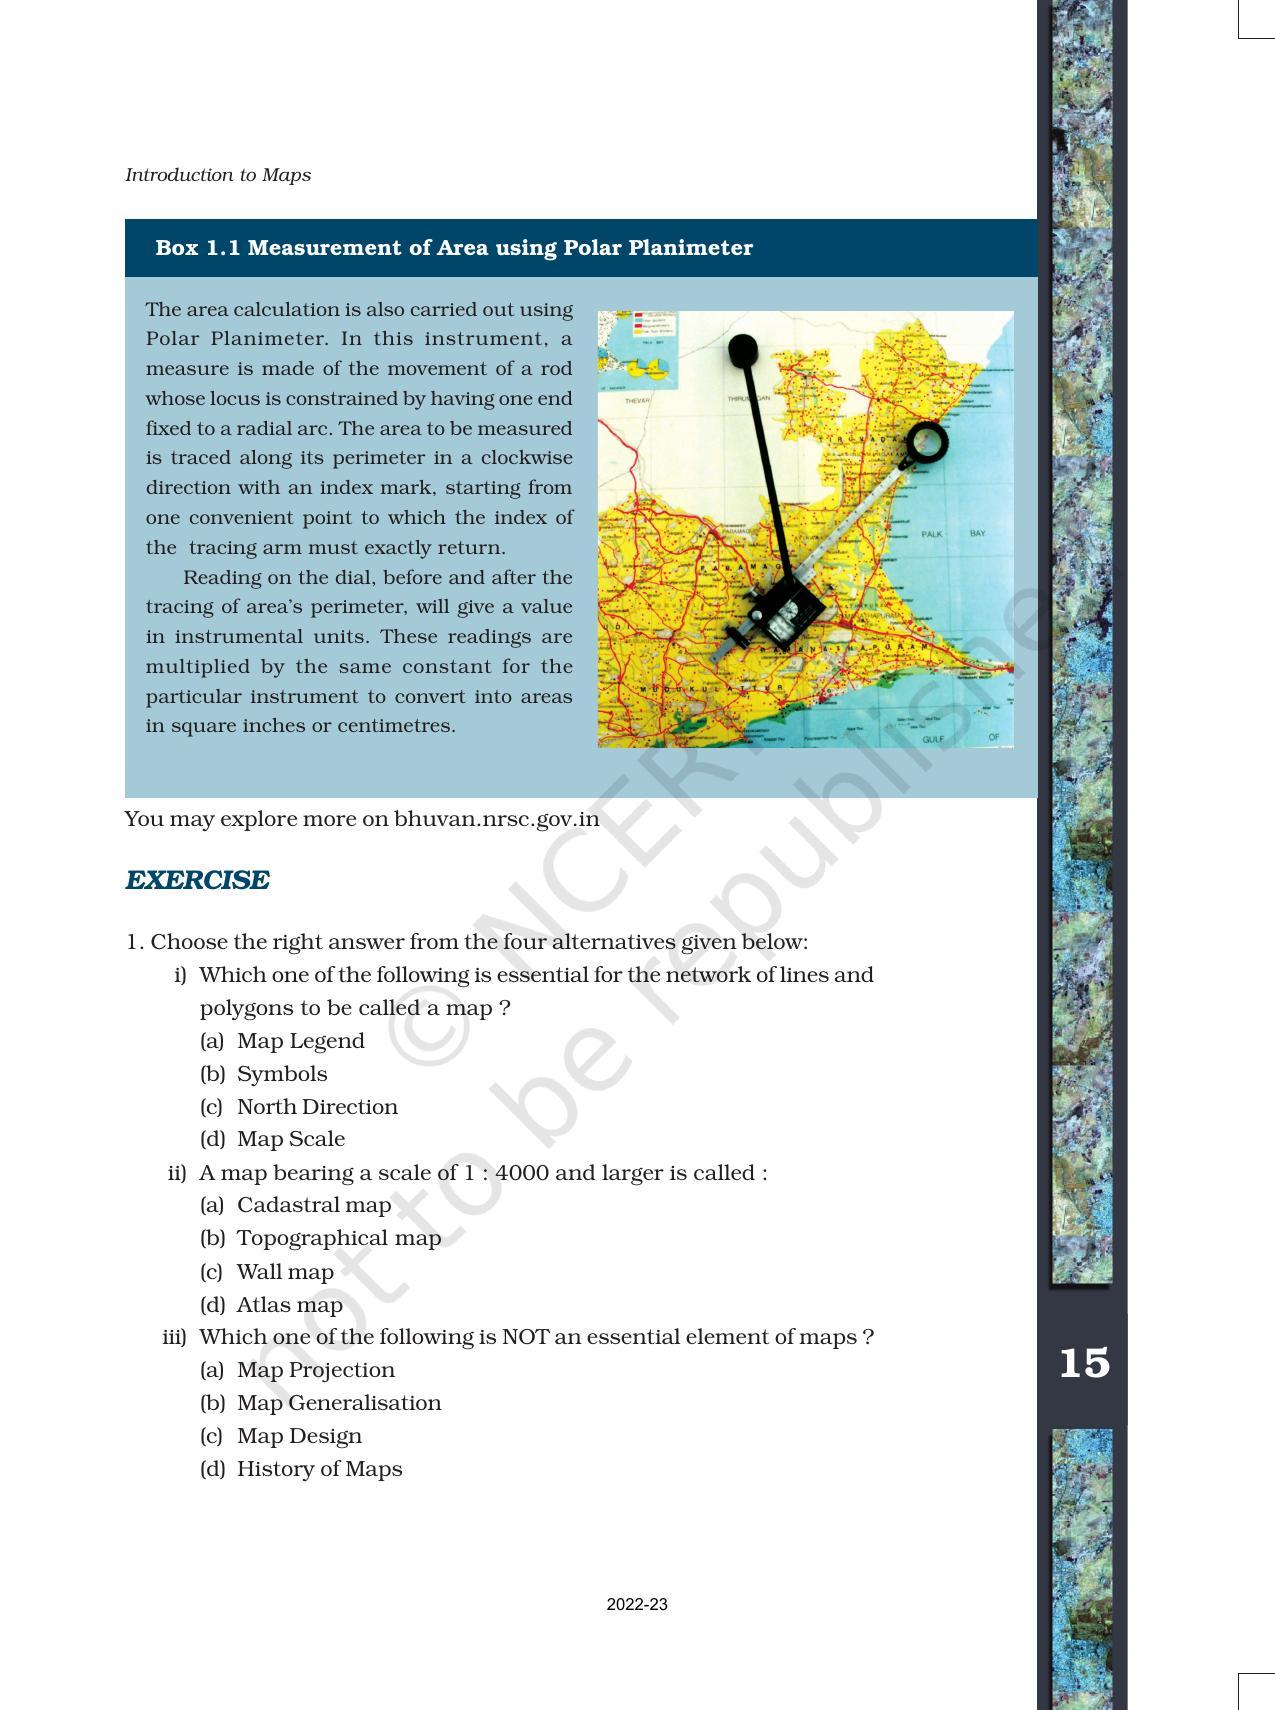 NCERT Book for Class 11 Geography (Part-III) Chapter 1 Introduction to Maps - Page 15